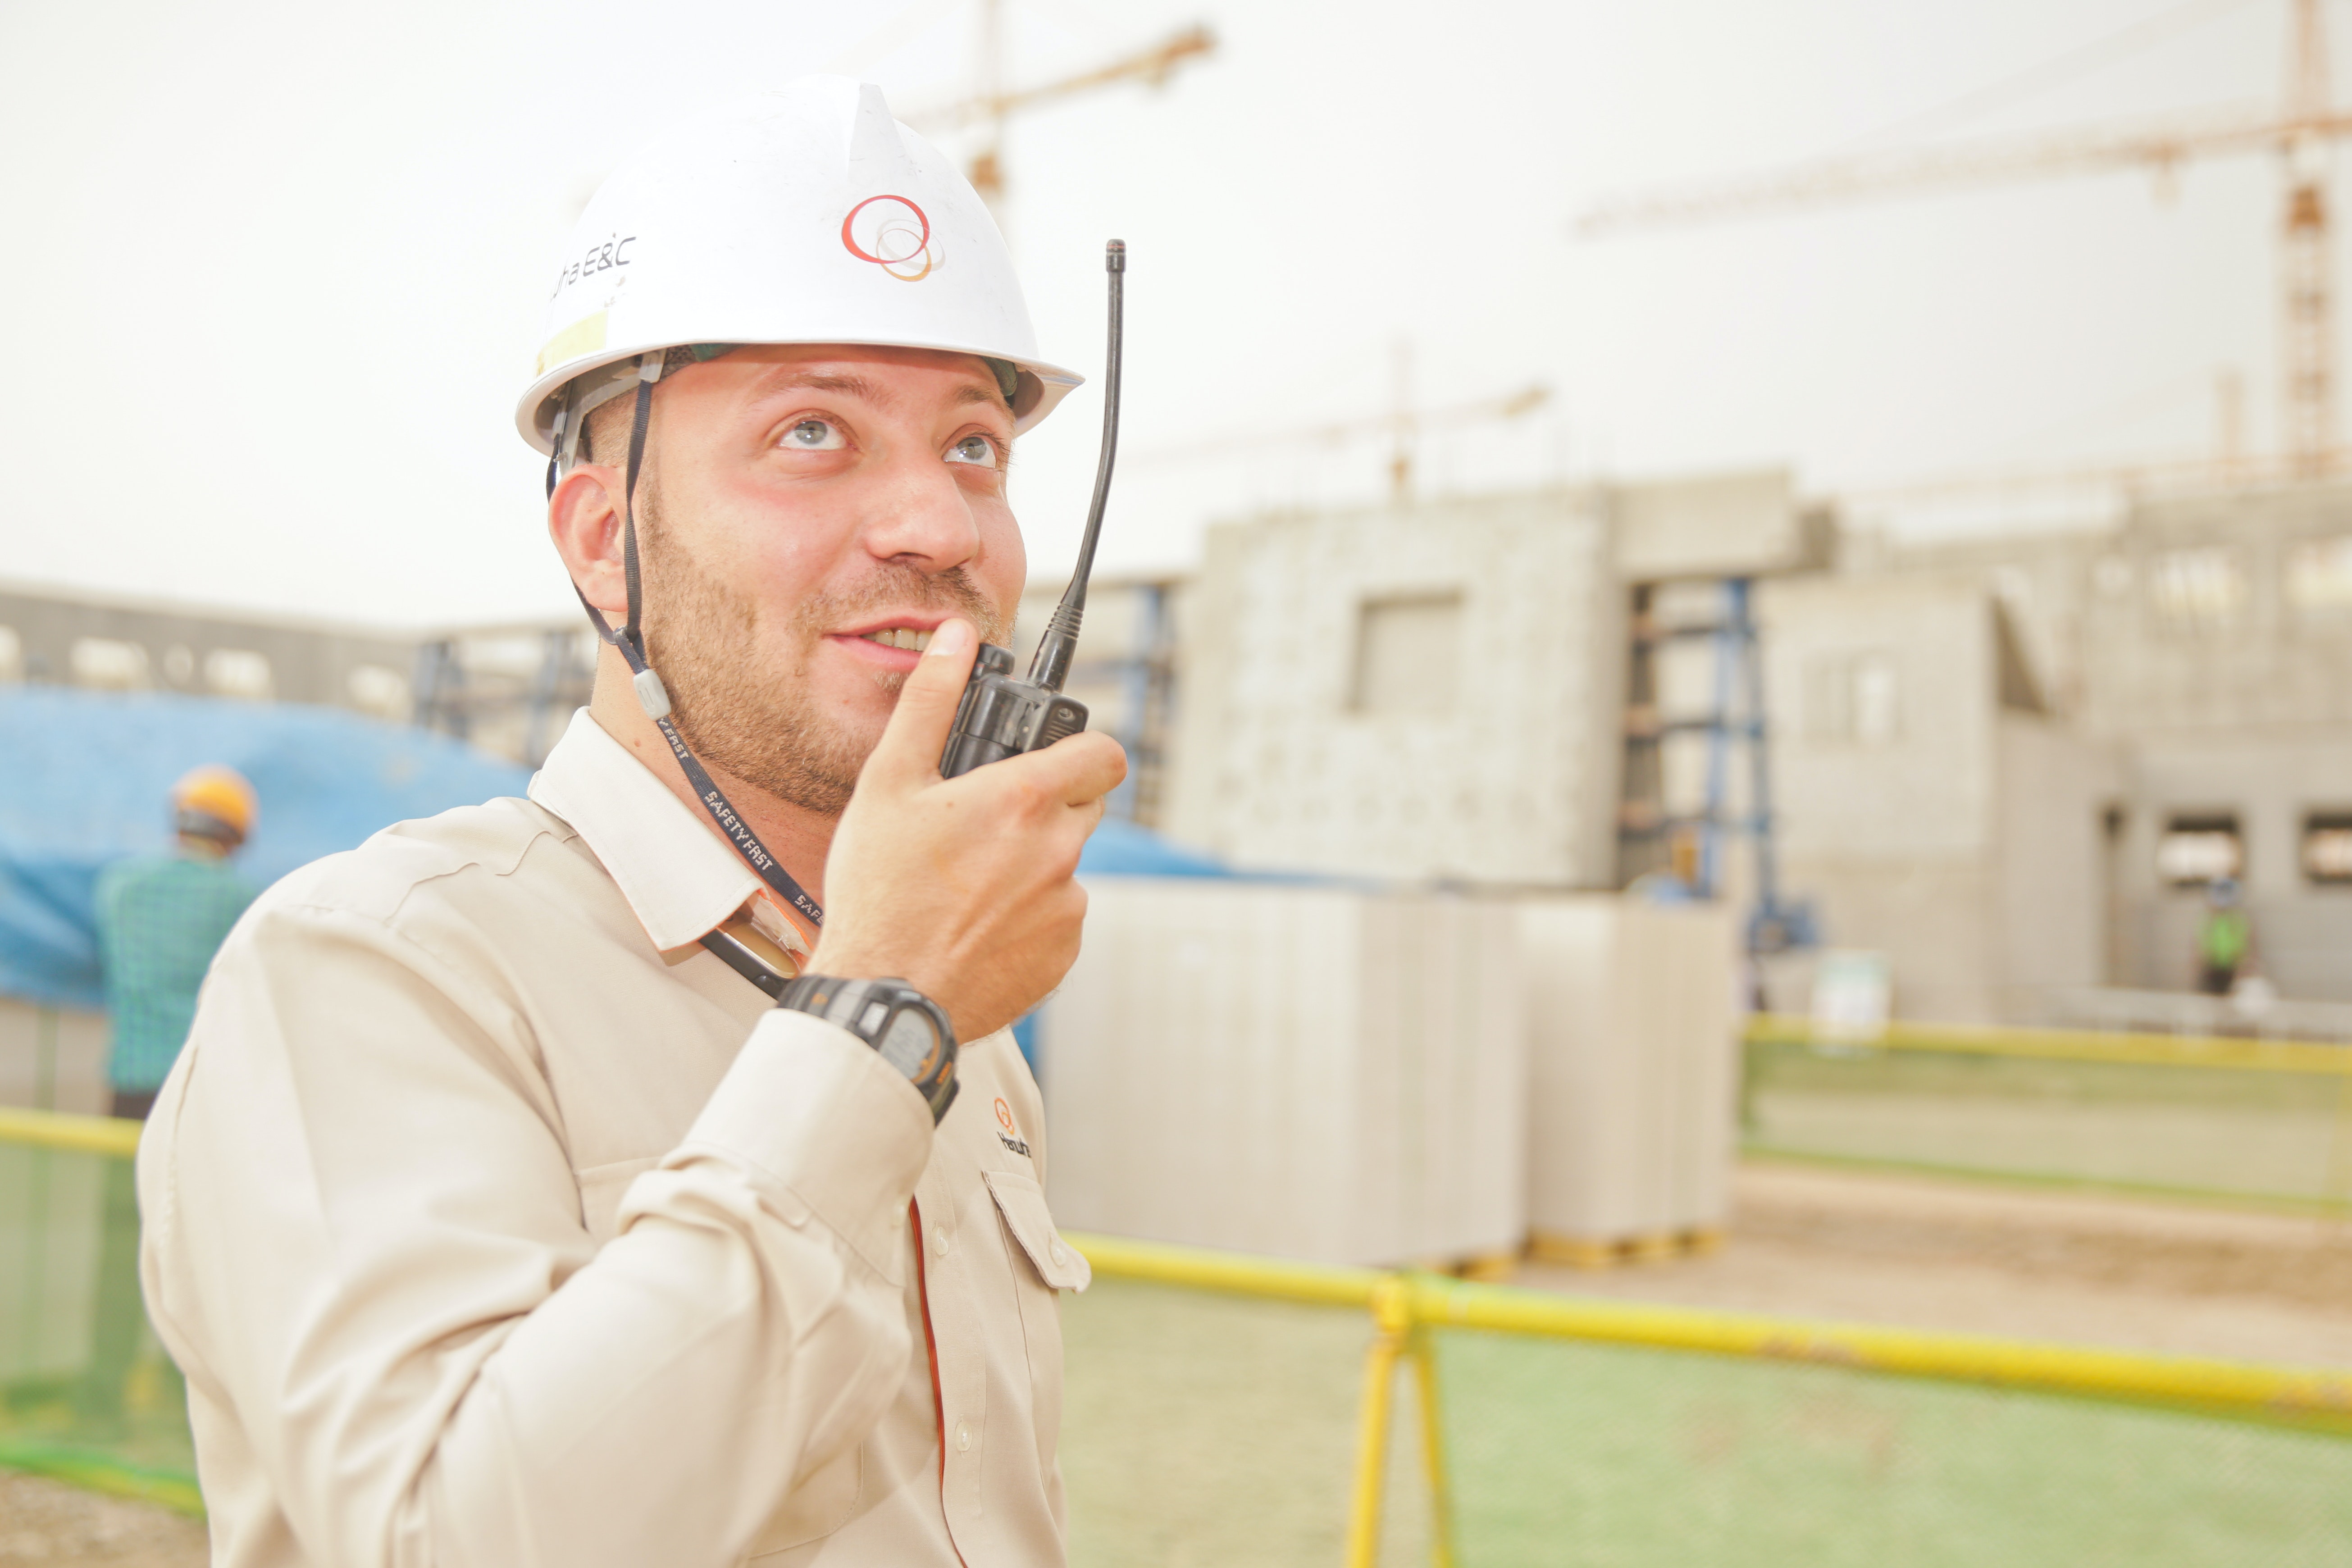 Employee safety with a safety management system